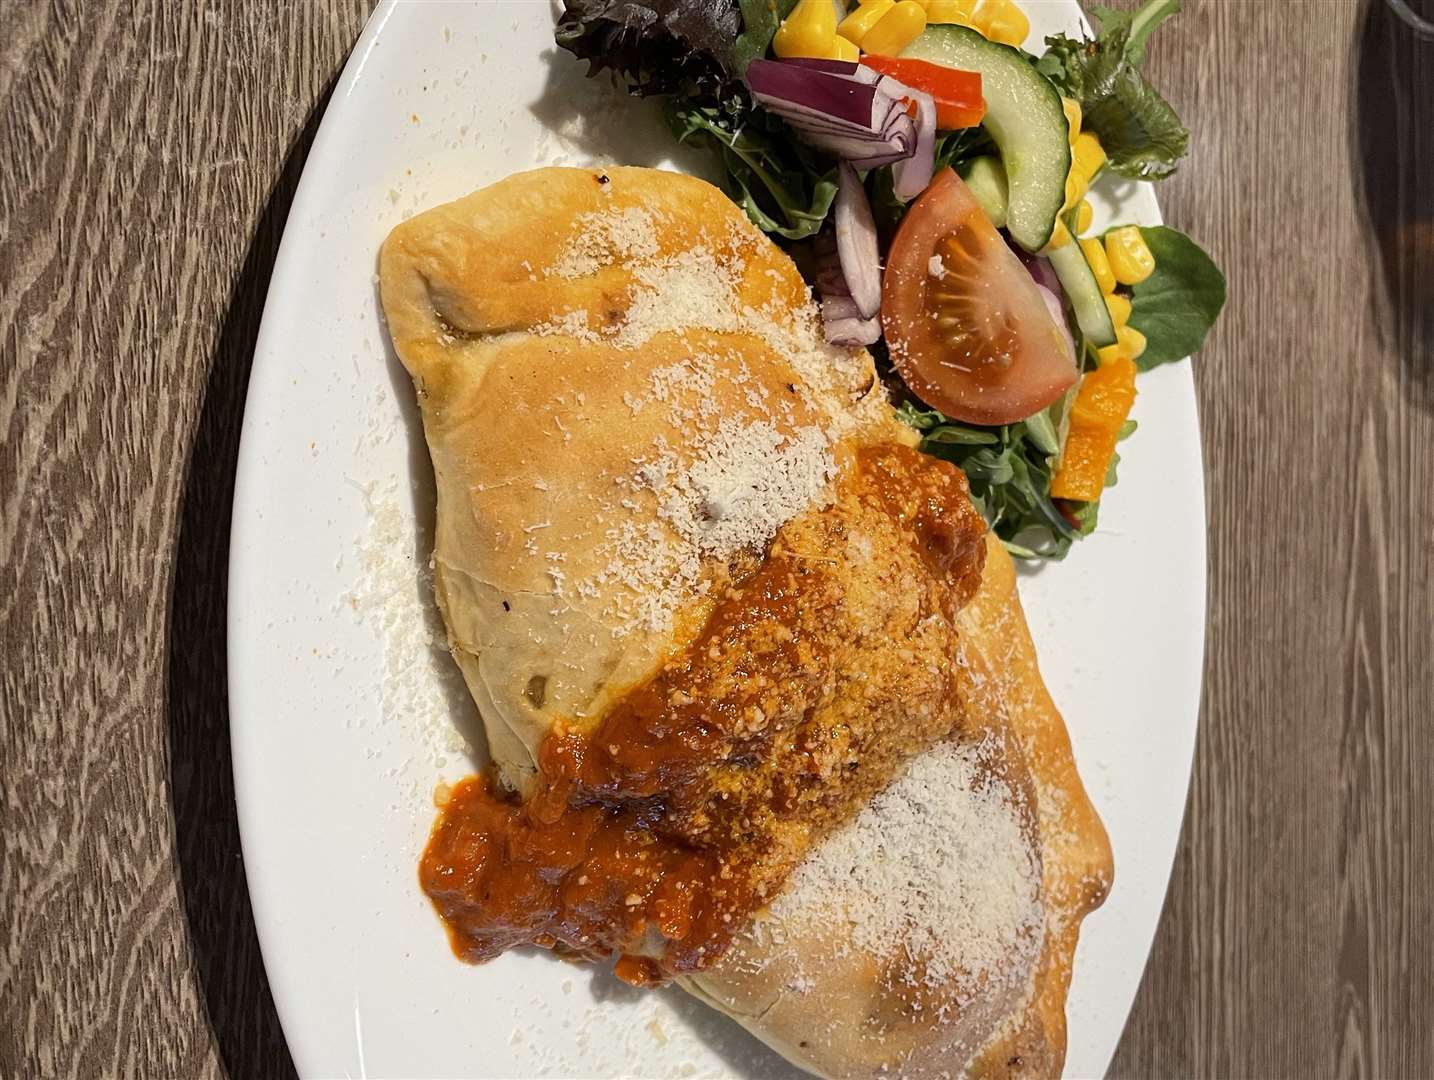 The calzone served at Monty’s Bistro